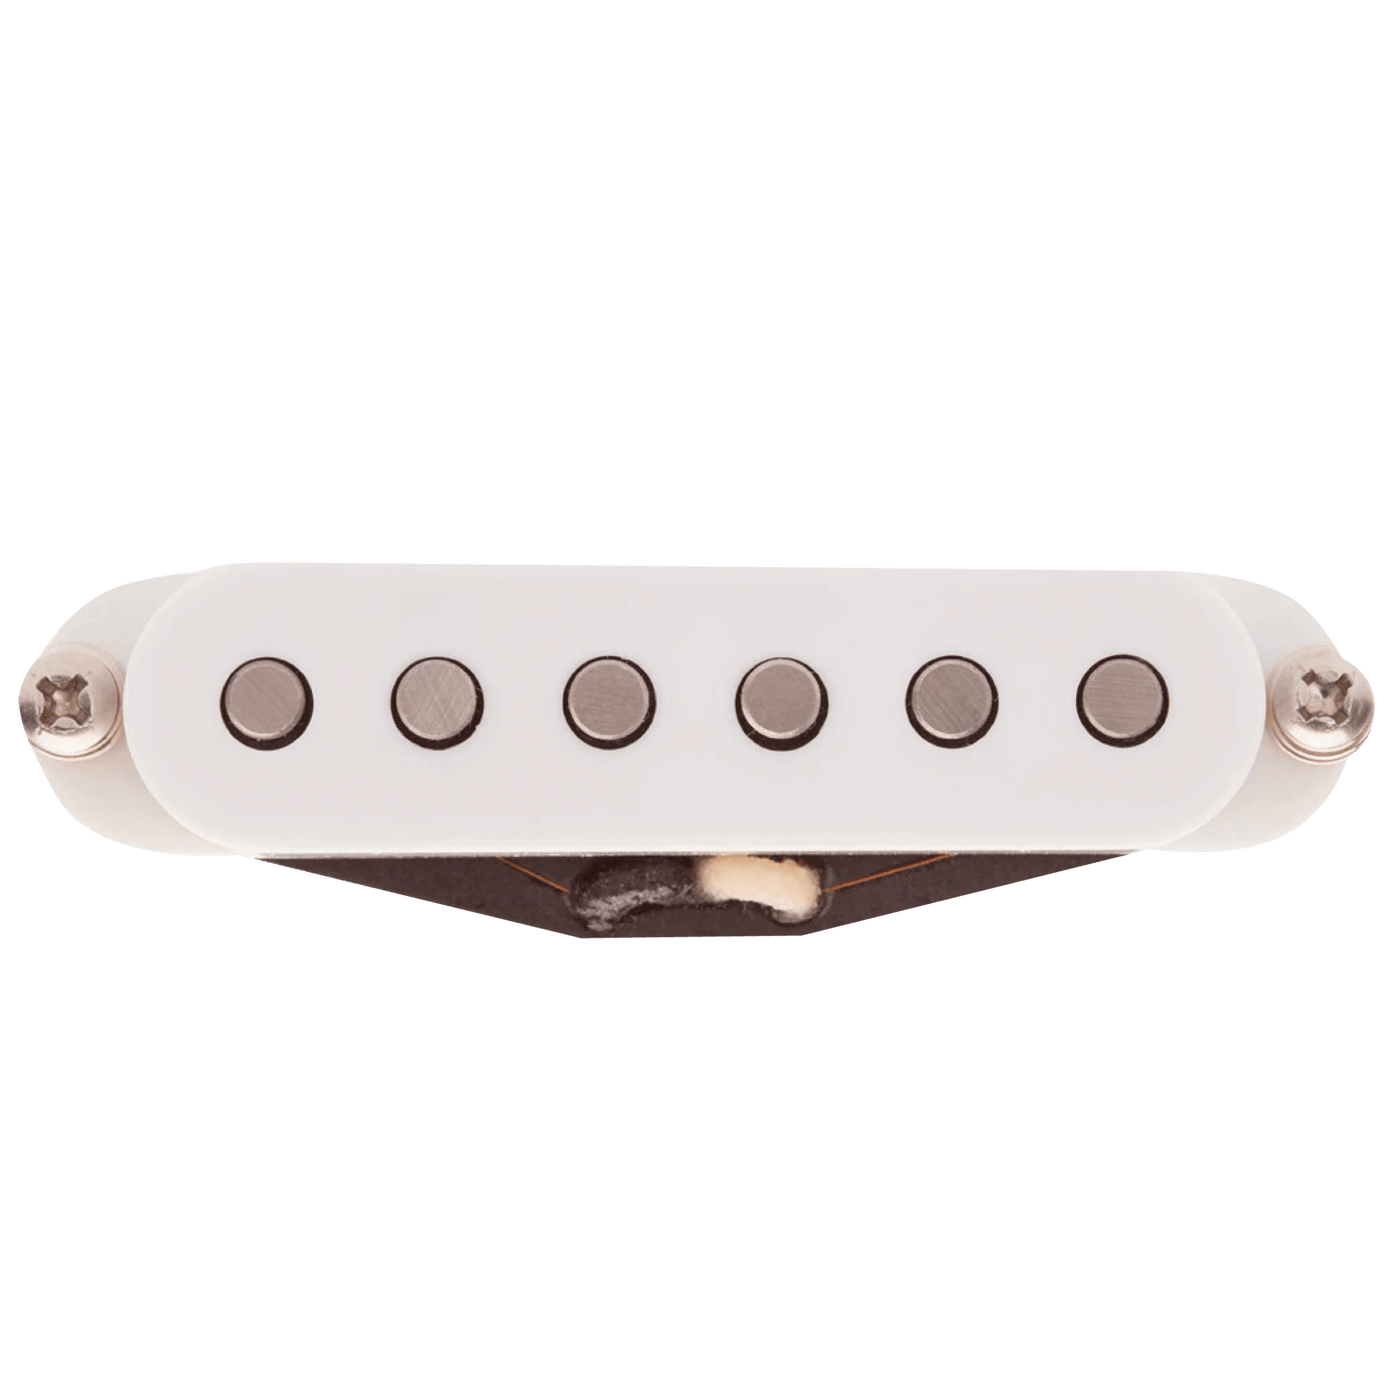 Suhr V60LP White (Middle) - $129990 - Gearhub - The V60 and V60LP pickups faithfully recreate the classic single-coil sounds of the 60’s. These pickups also use the same magnets that were used in the pickups made during this era. What you get are clear bell-like highs, warm and punchy mids, and big yet firm lows that are the hallmark of great vintage pickups.The V60LP pickup is wound using a proprietary winding process that replicates the hand-wound pattern of some early-60’s single-coil pickups which have